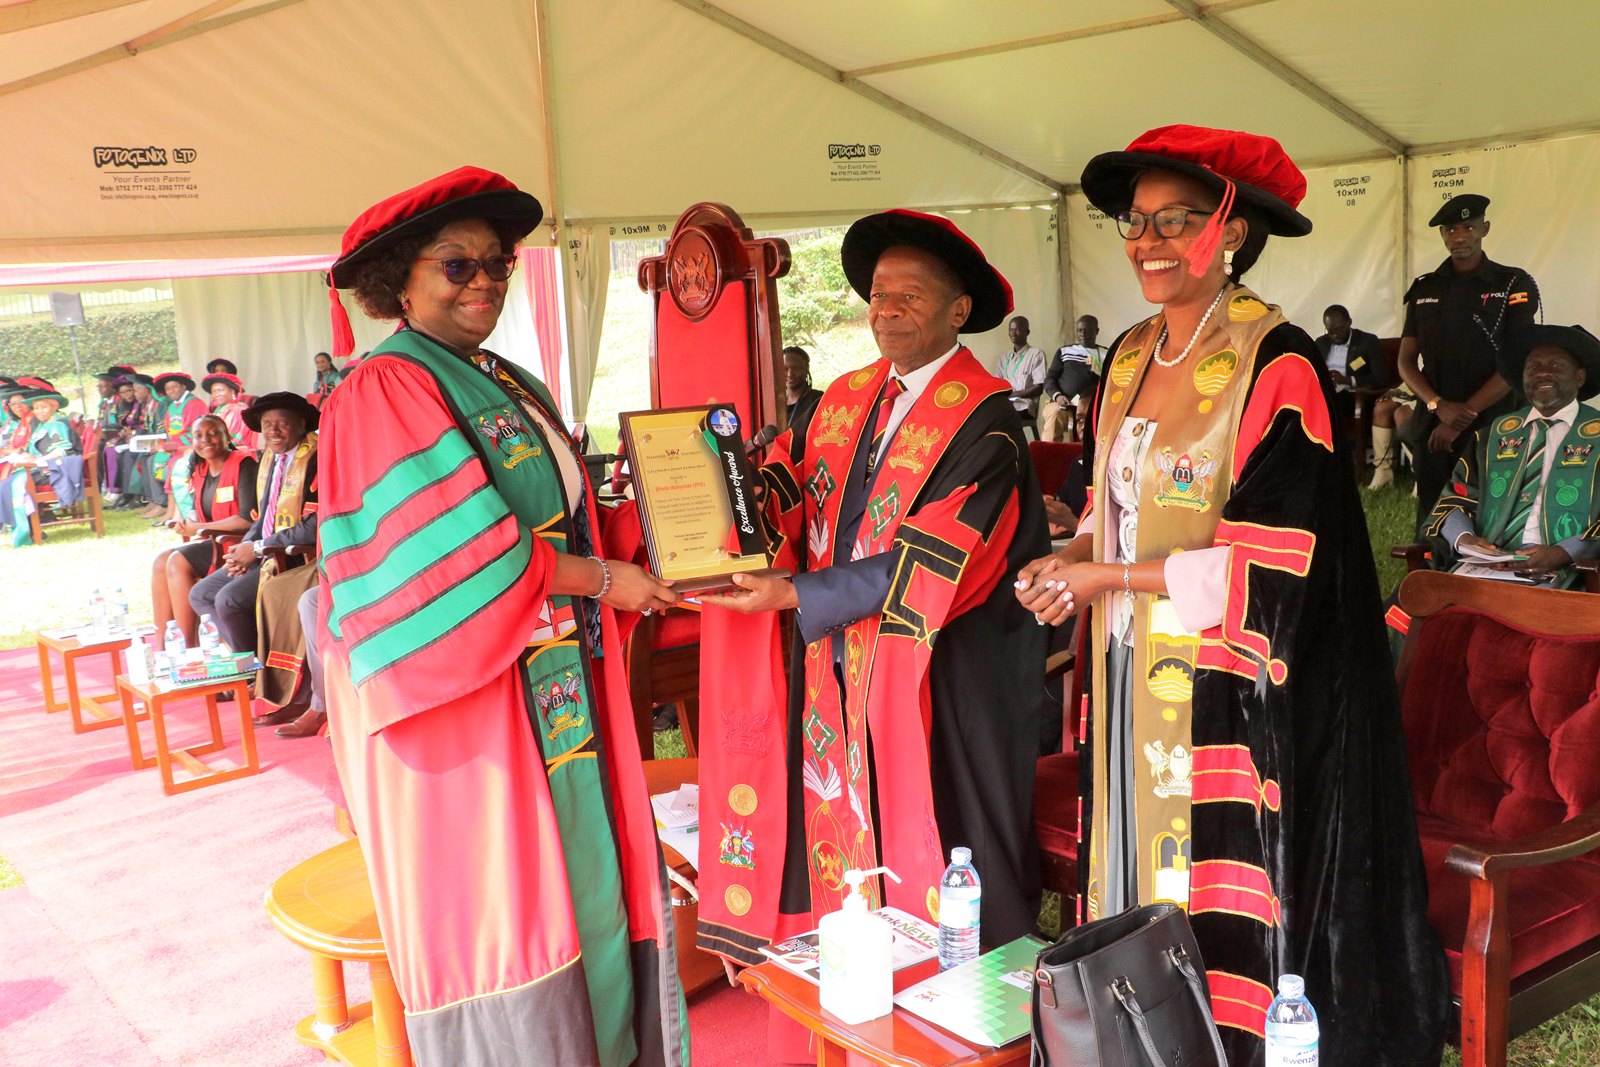 Hon. Dr. John Chrysestom Muyingo (Centre) who represented the Minister of Education and Sports Hon. Janet Museveni presents the Vice Chancellor's Research Excellence Award to Prof. Rhoda Wanyenze (Left) as the Chairperson of Council, Mrs. Lorna Magara (Right) witnesses on 29th January 2024. 74th Graduation Ceremony, Day 1, 29th January 2024, School of Public Health, College of Health Sciences (CHS), Freedom Square, Makerere University, Kampala Uganda, East Africa.